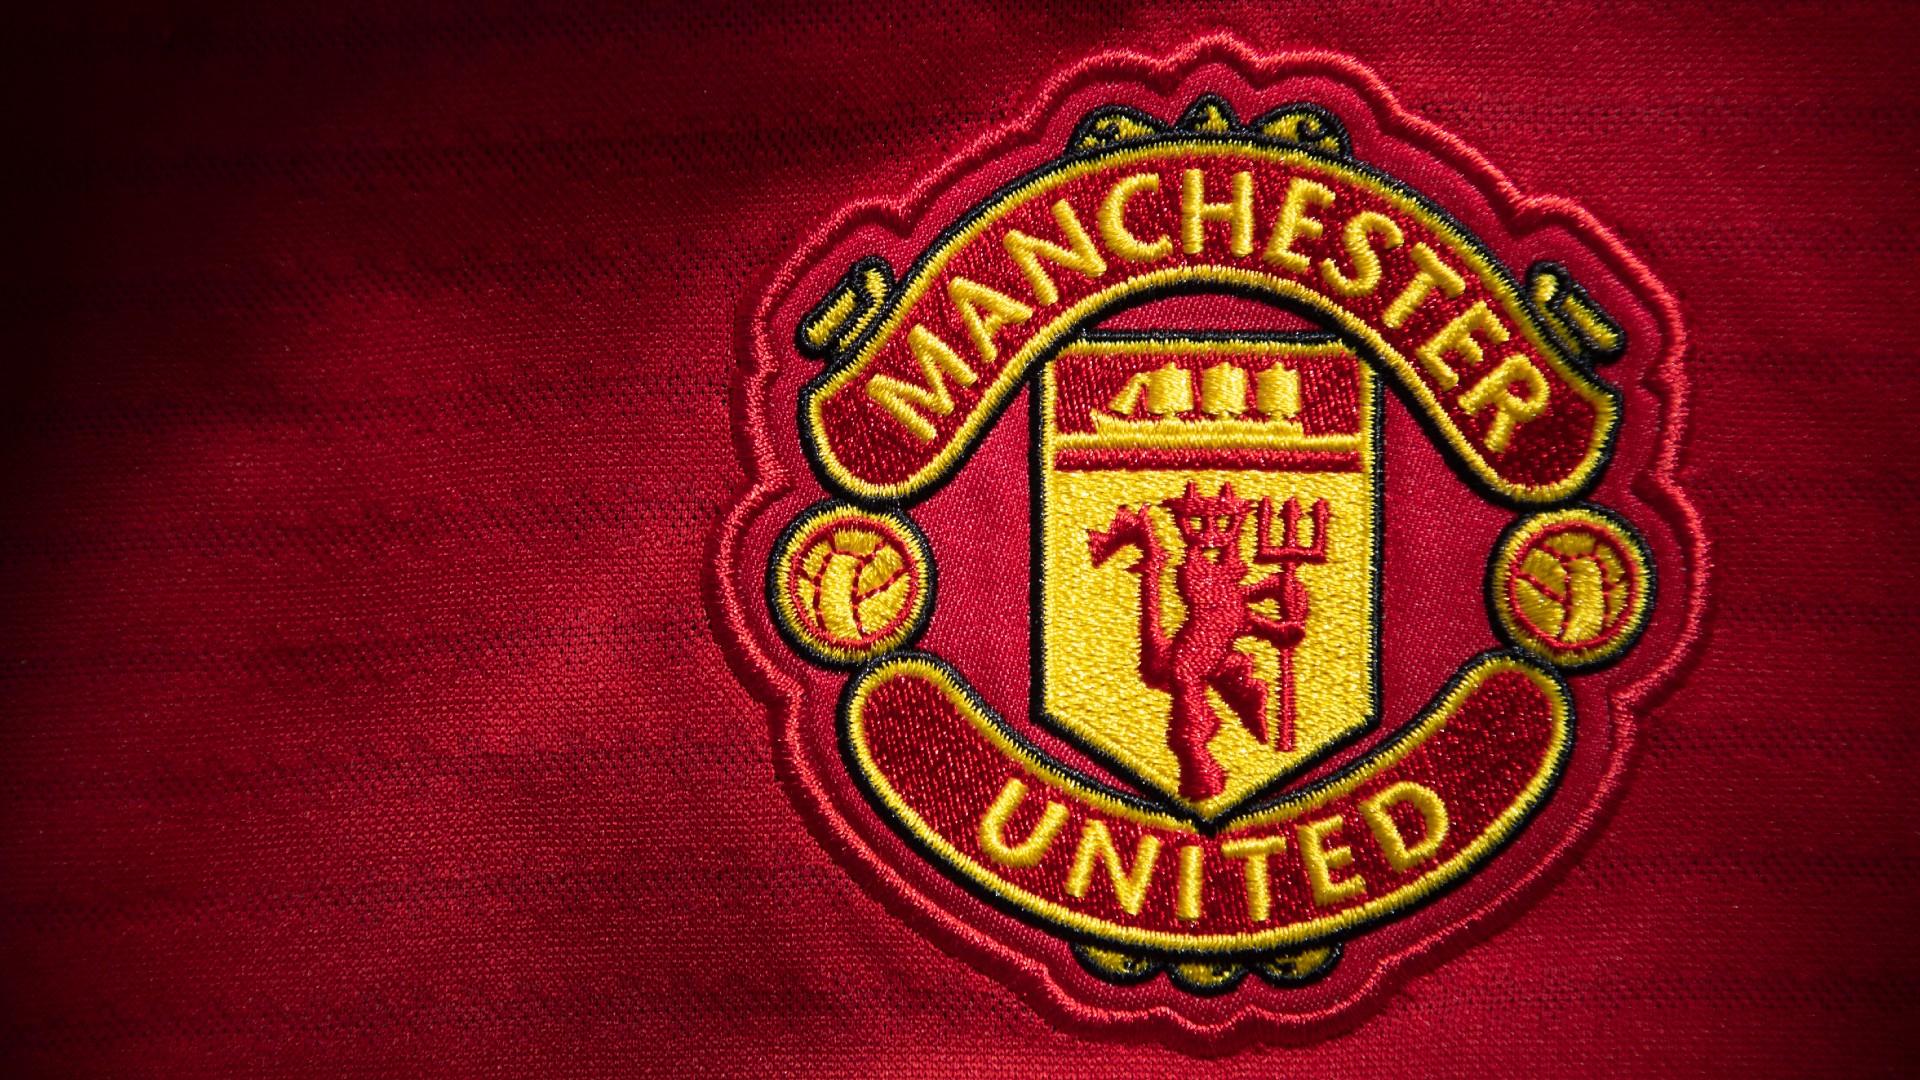 Manchester United January transfer window 2022: Player signings, loans & sales